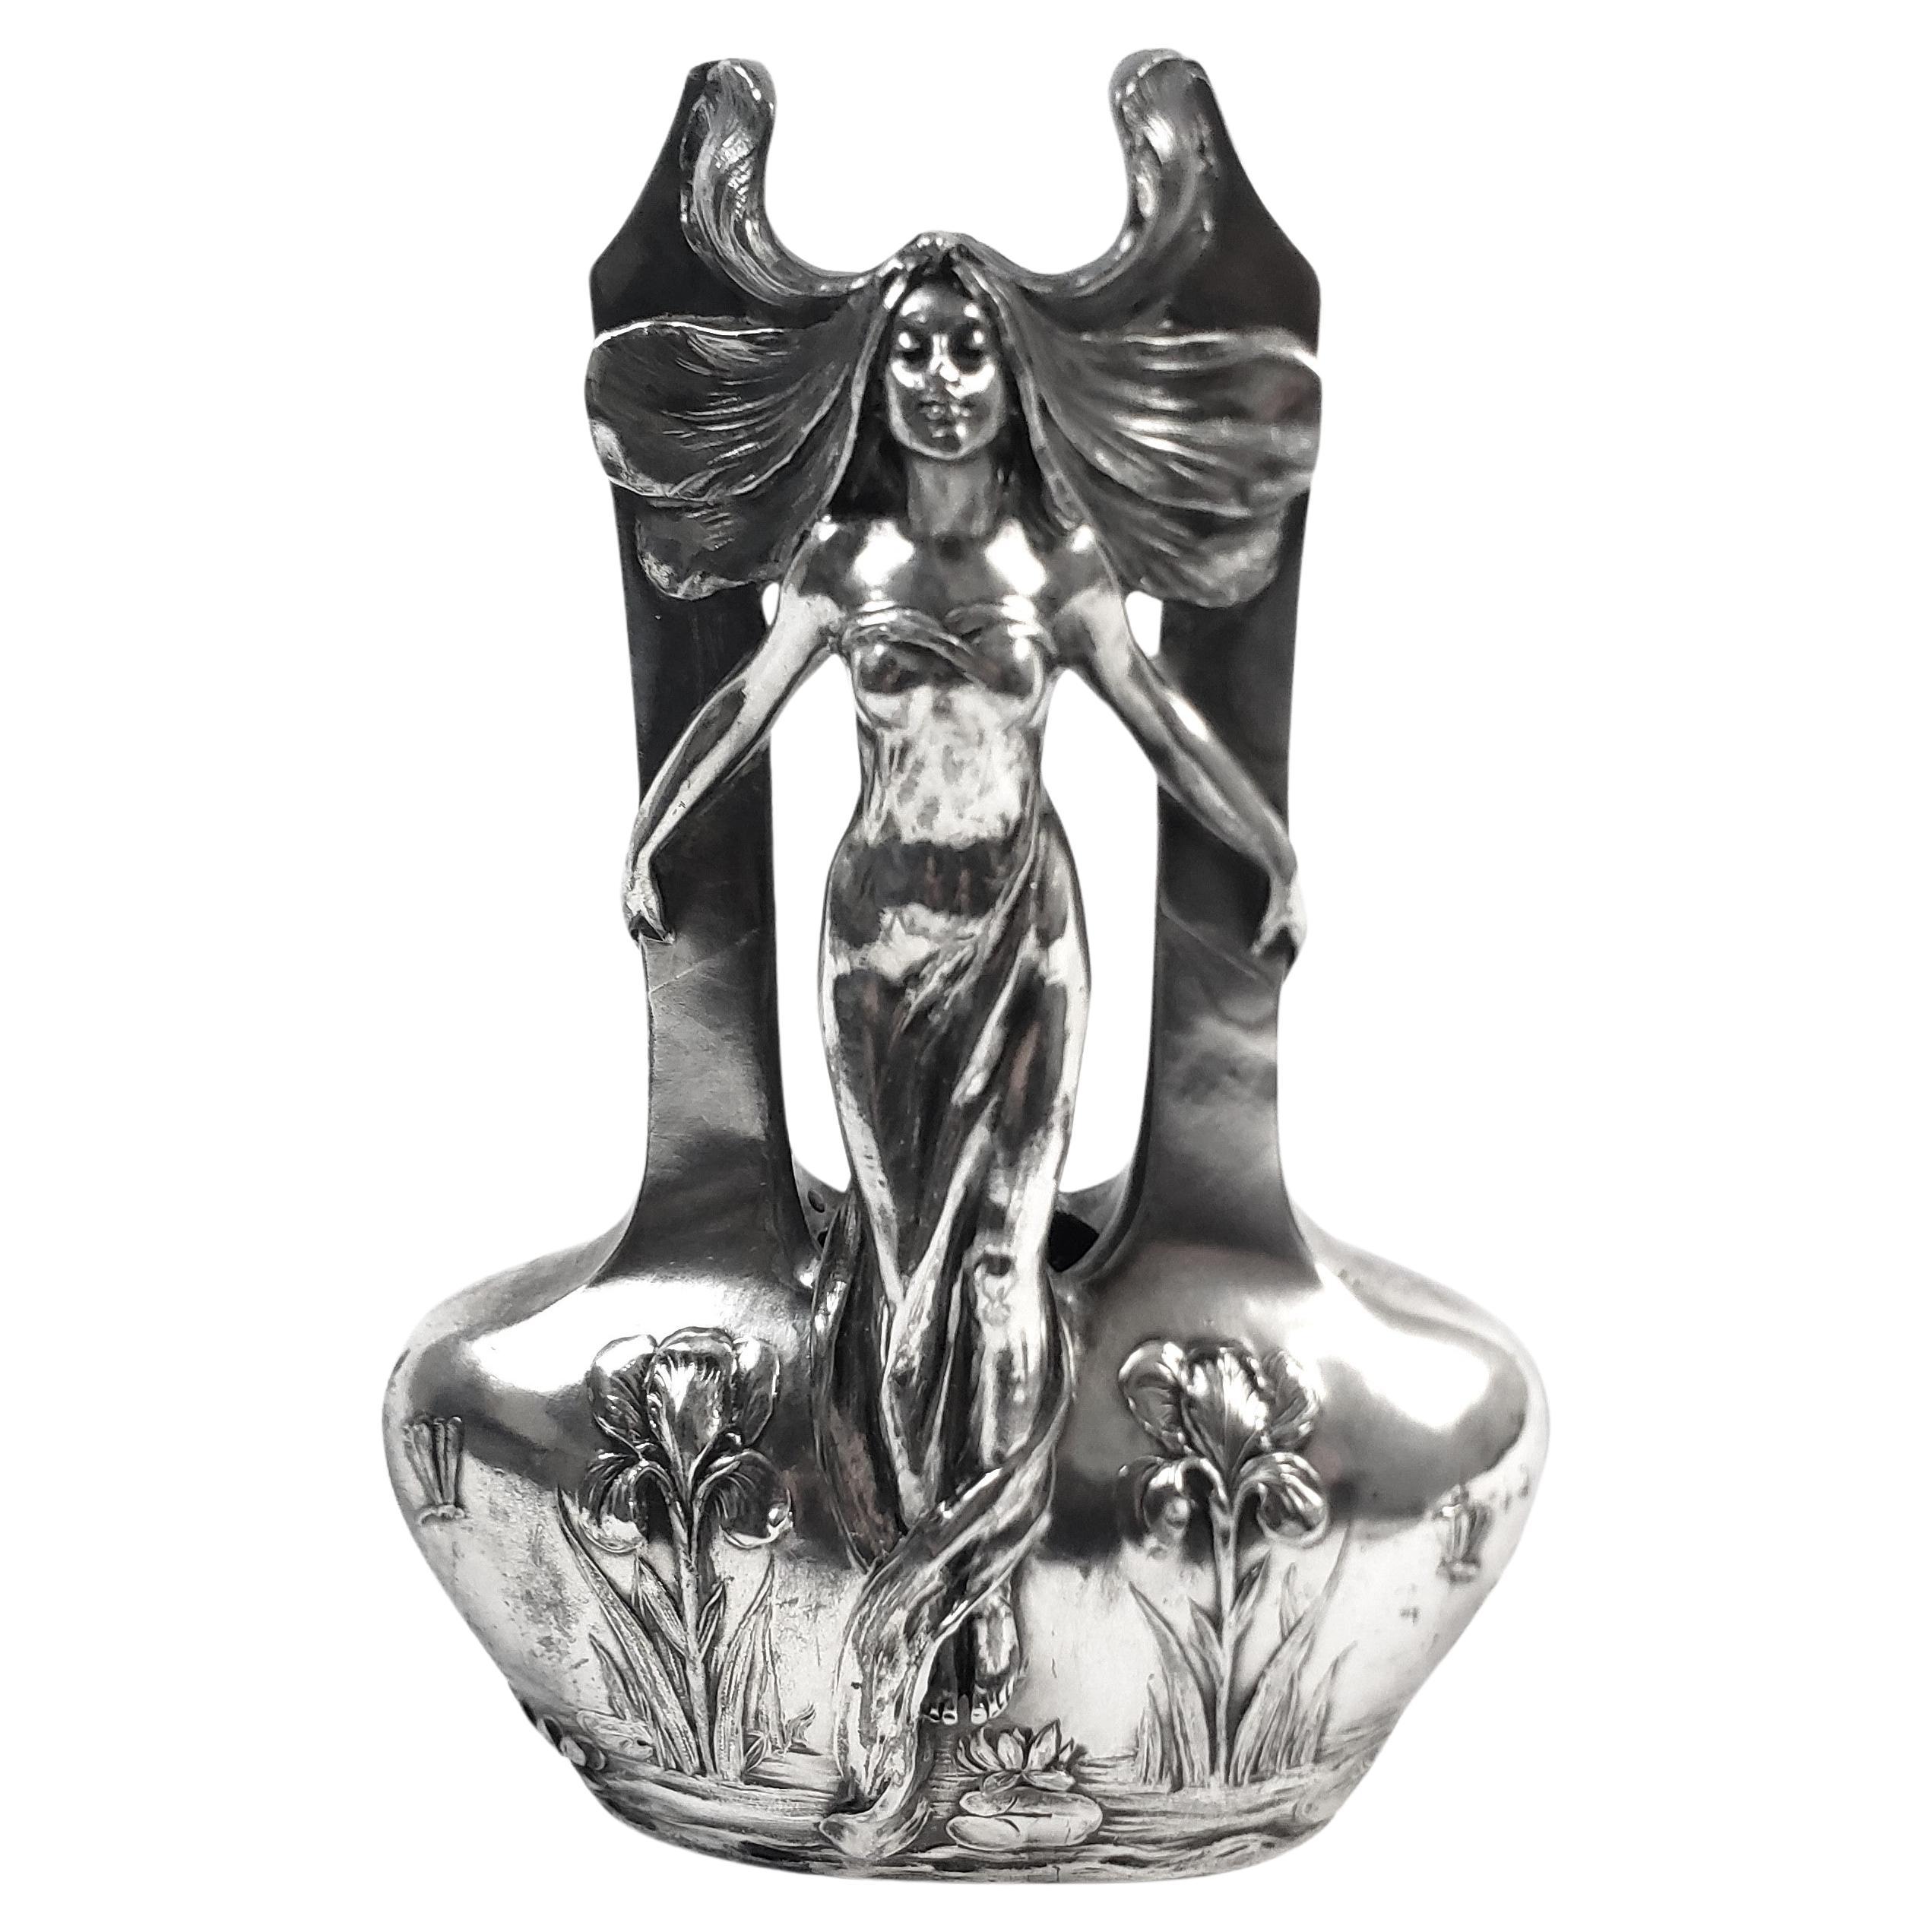 Antique Art Nouveau Vase with a Stylized Female and Pond Inspired Decoration